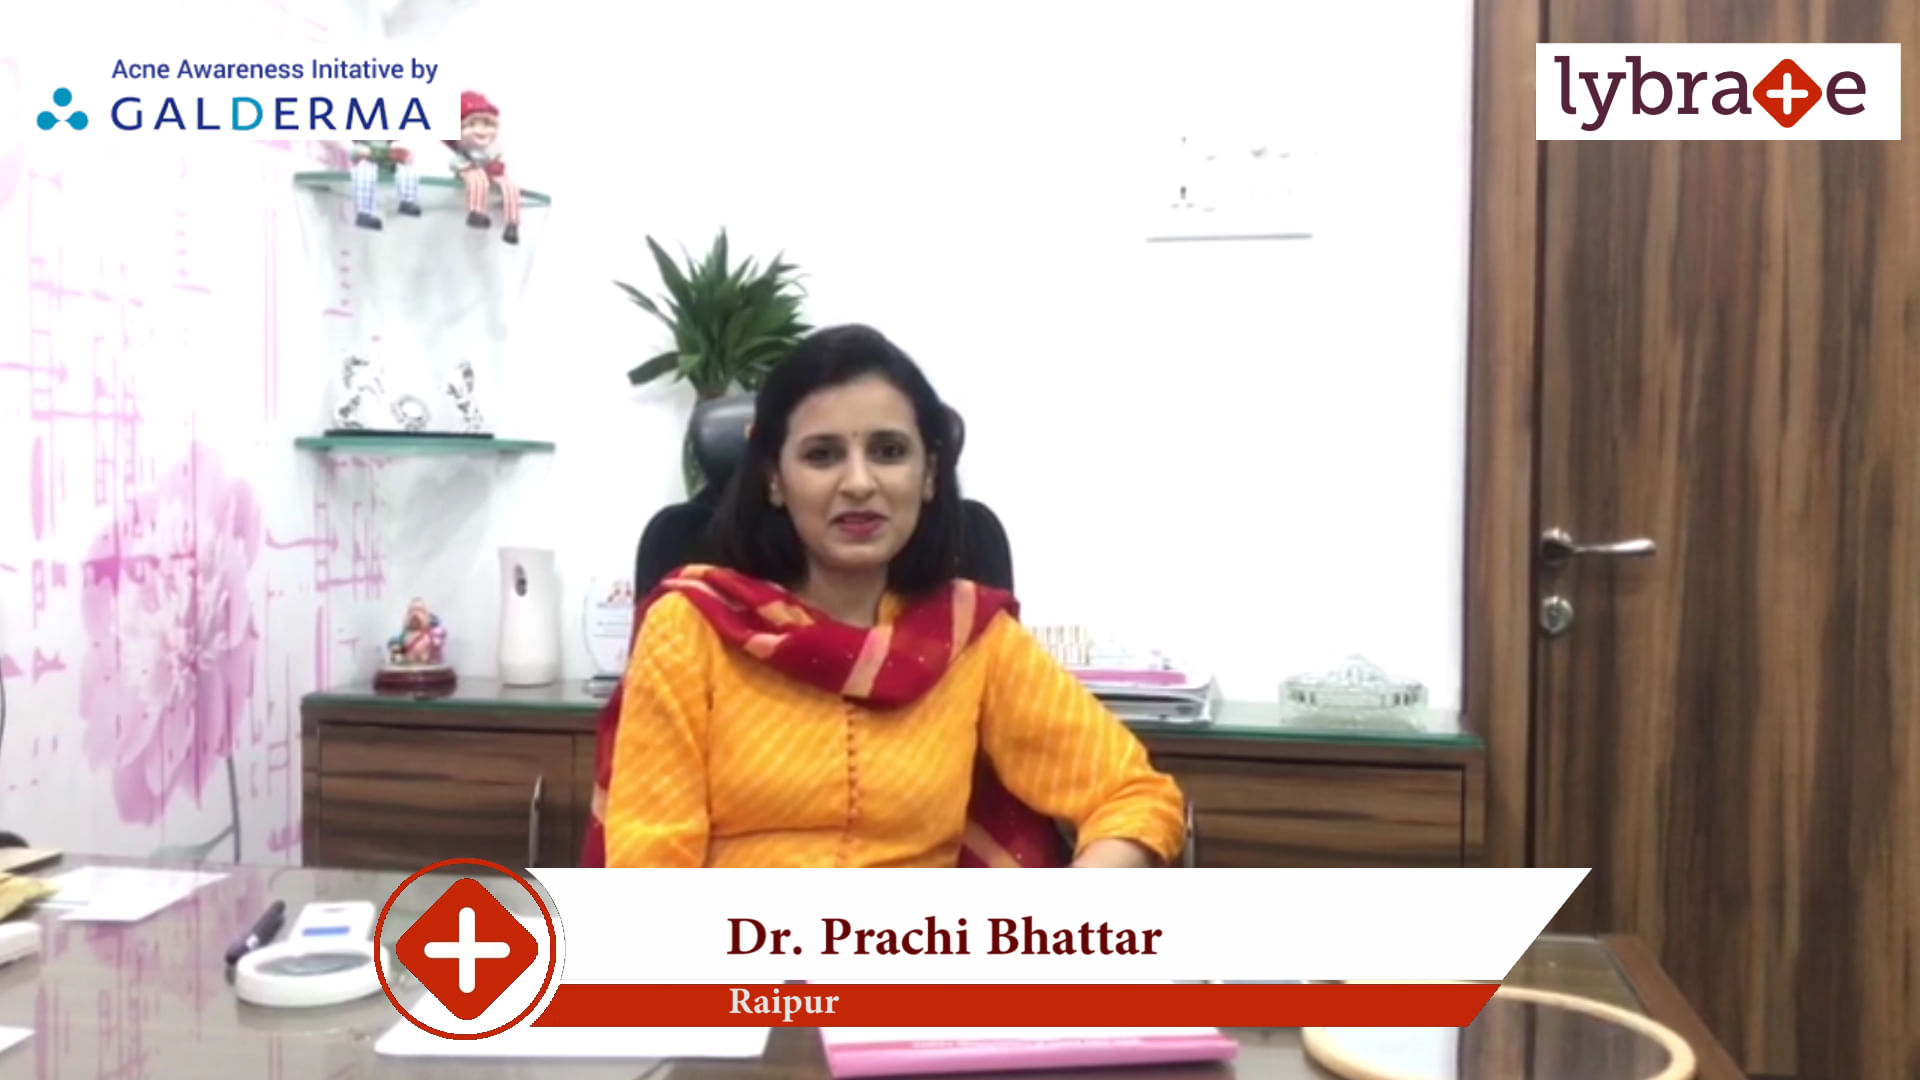 Lybrate | Dr. Prachi Bhattar speaks on IMPORTANCE OF TREATING ACNE EARLY